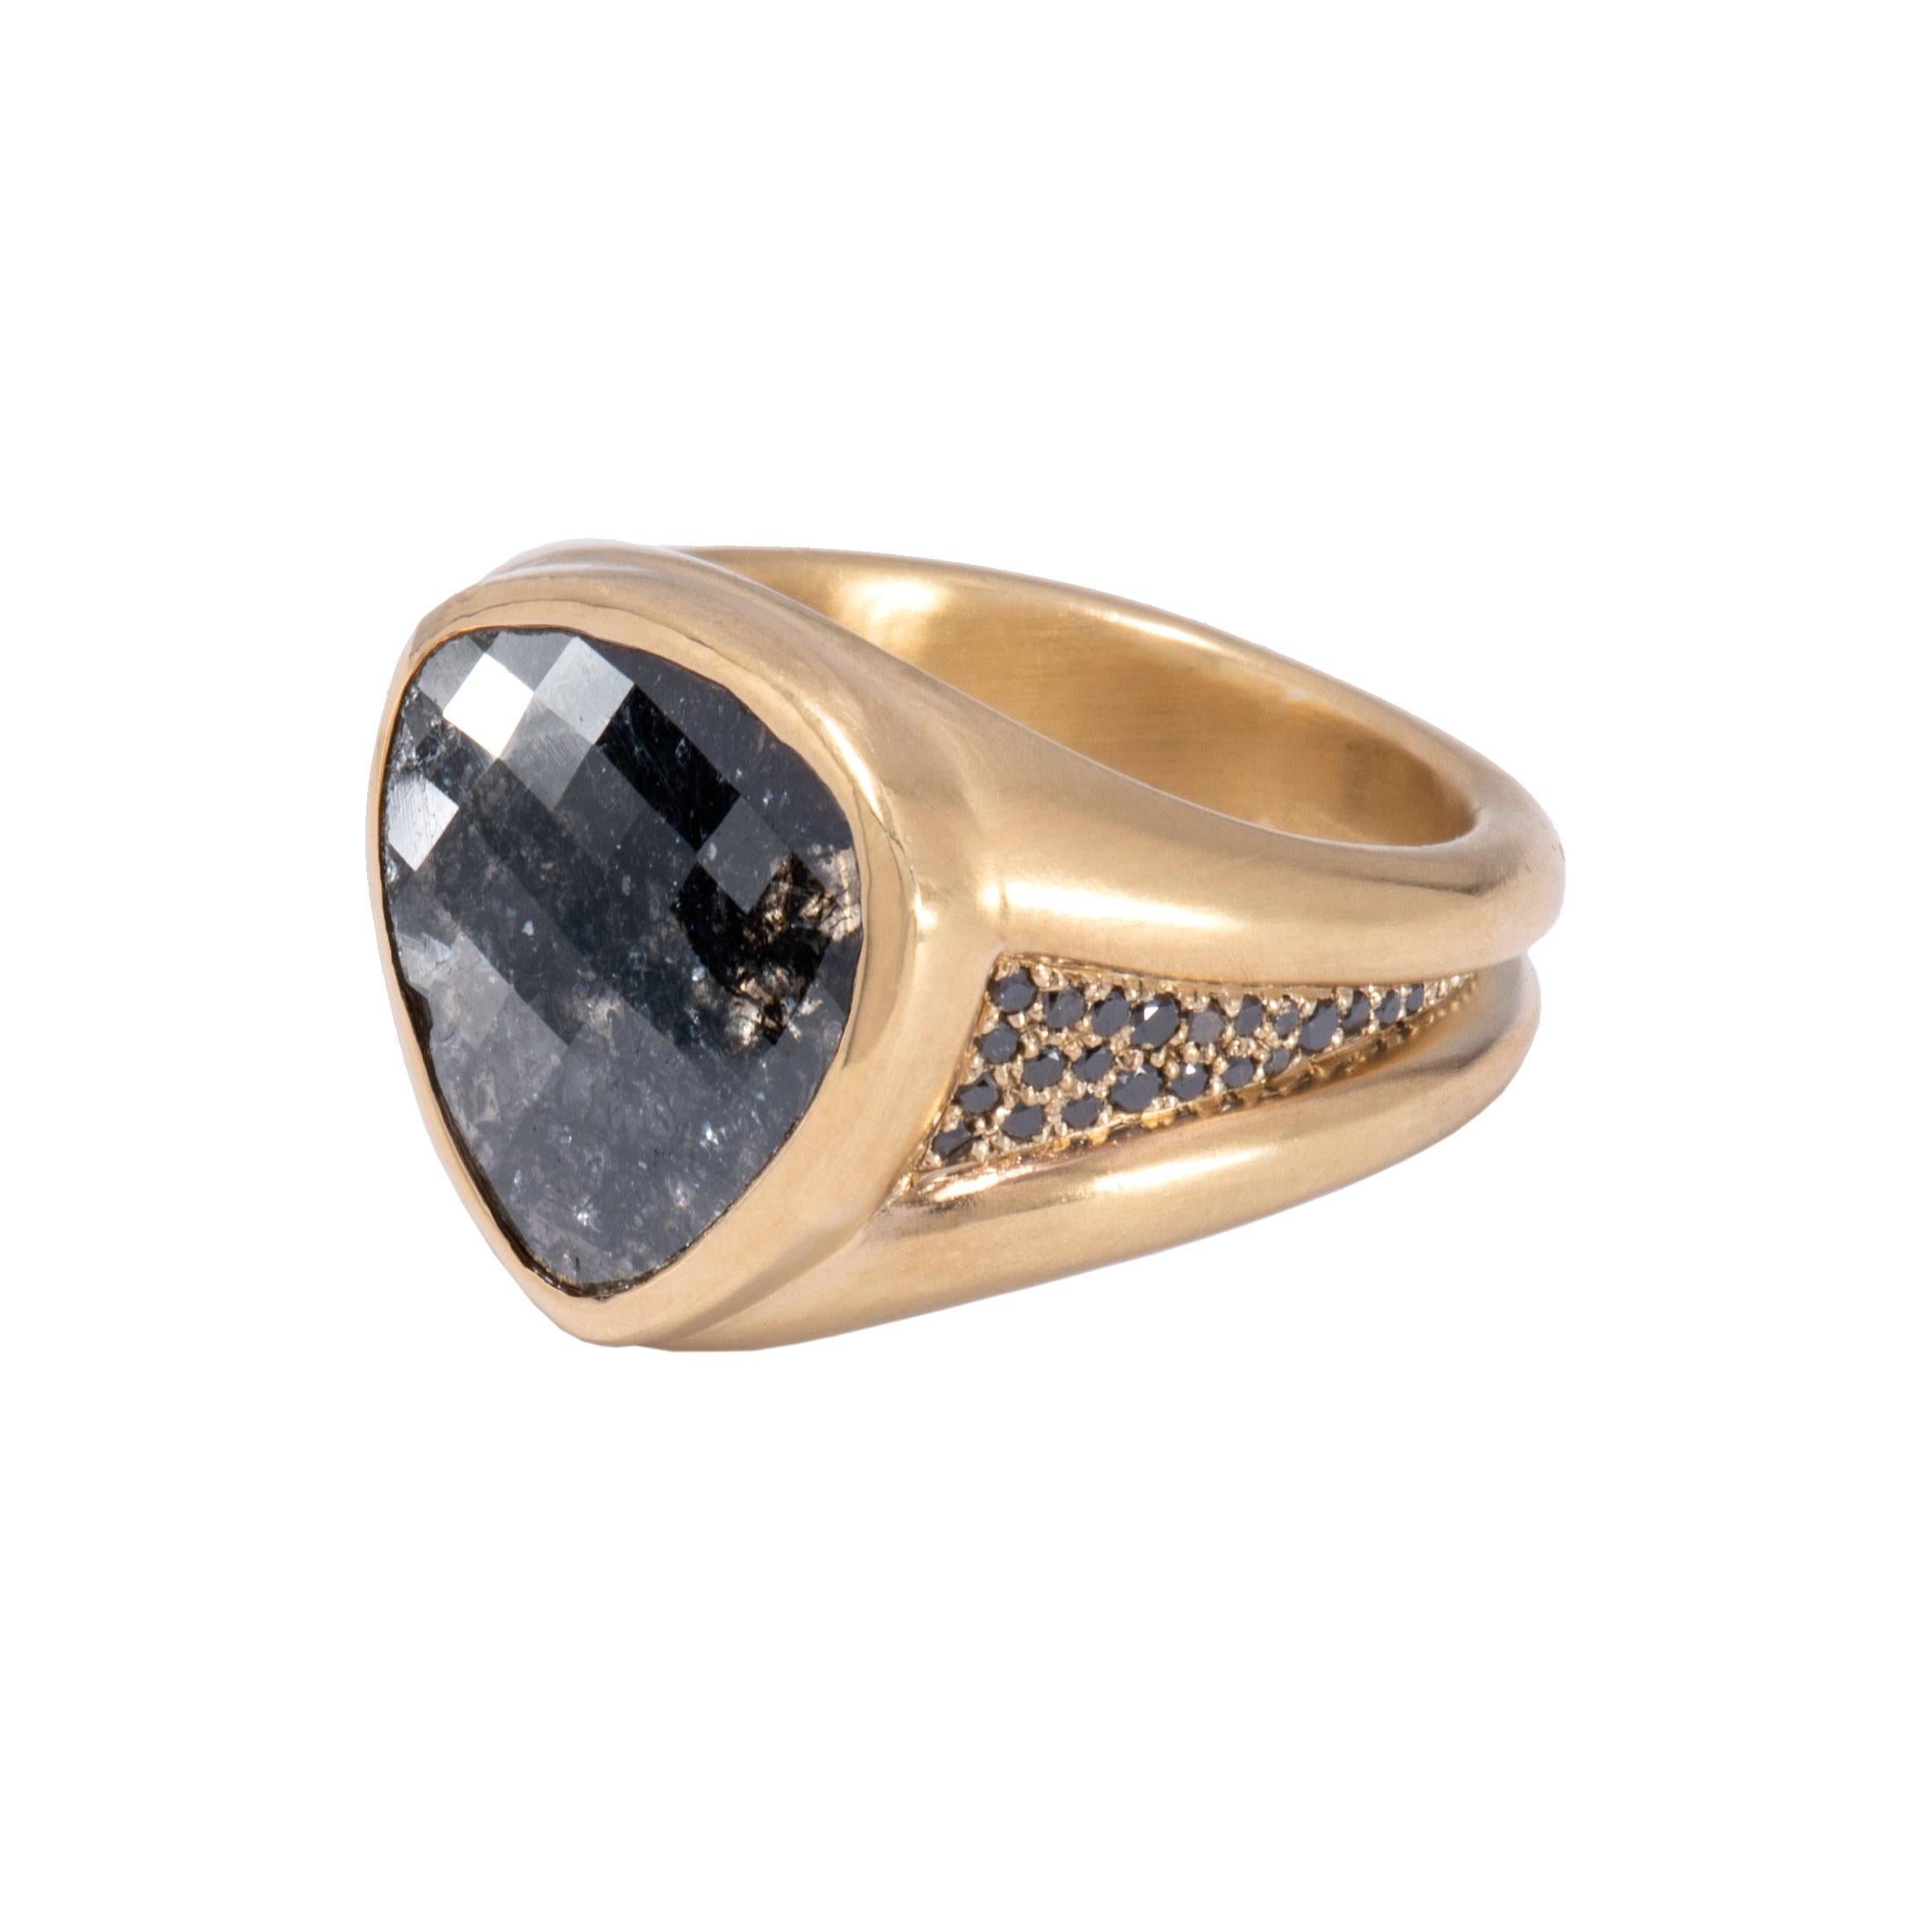 In the seats of power, the black diamond claims the throne. A glittering kaleidoscope is reflected in this 5.85 karat black diamond ring set in 18 karat gold. Tapered shanks are deep set and paved with a highway of more black diamonds for a regal